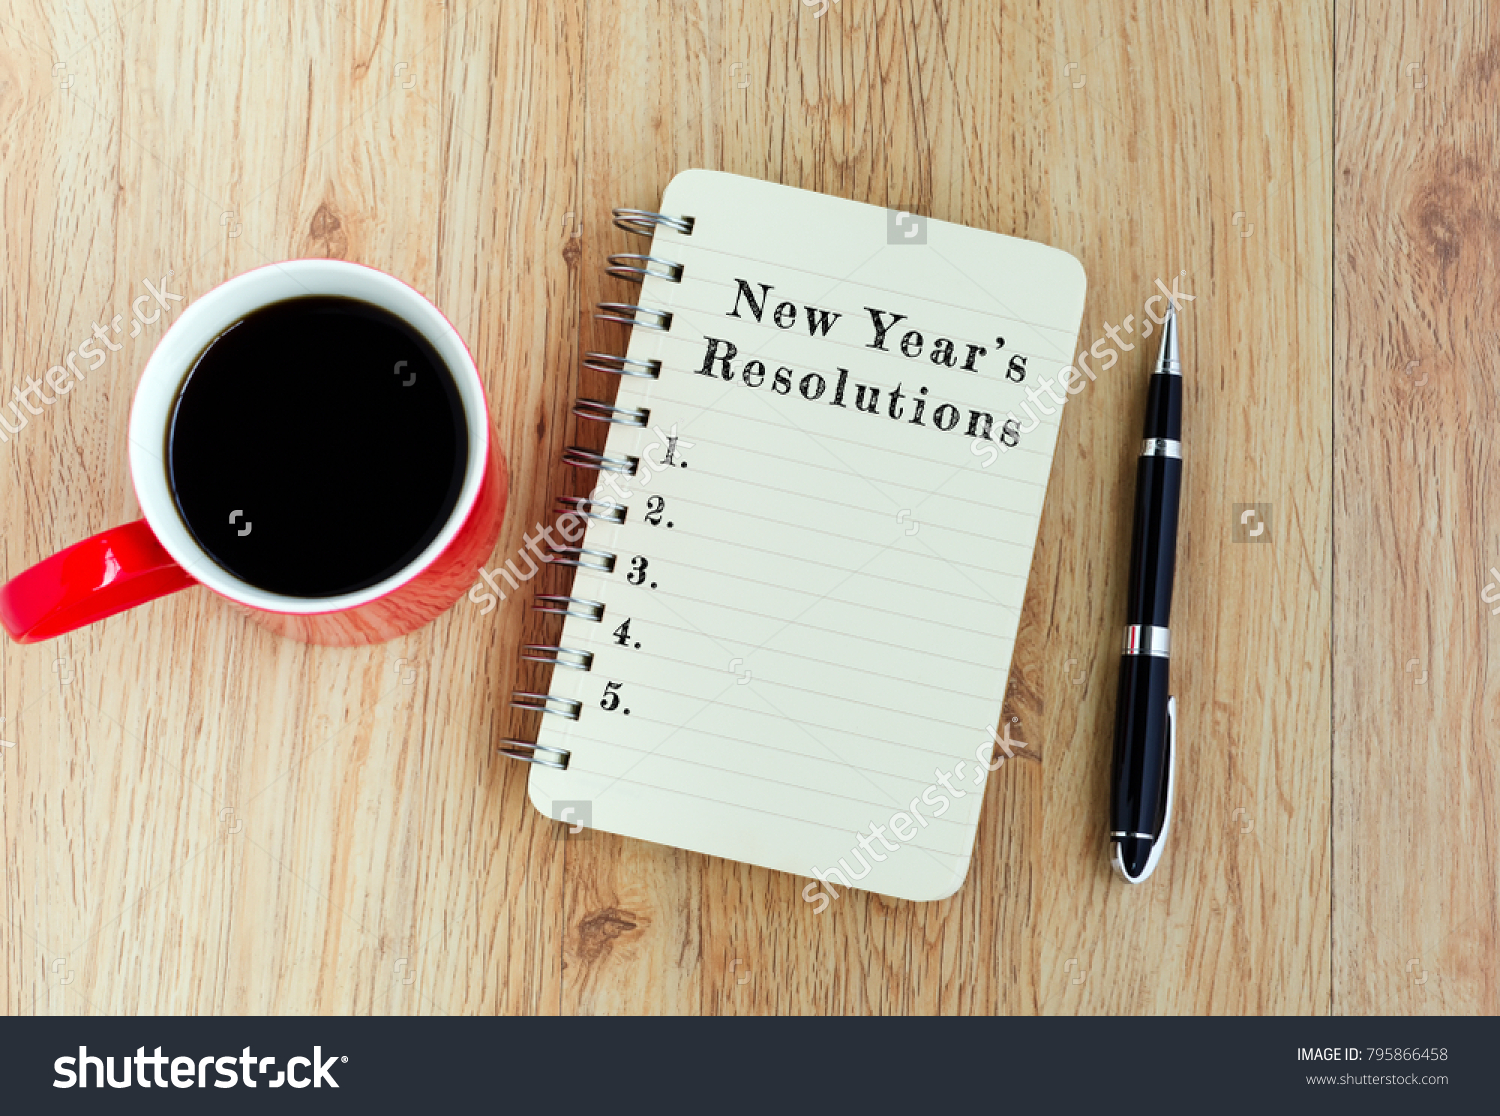 New Year's Resolutions text on notepad with pen and a cup of coffee, wooden background
 #795866458